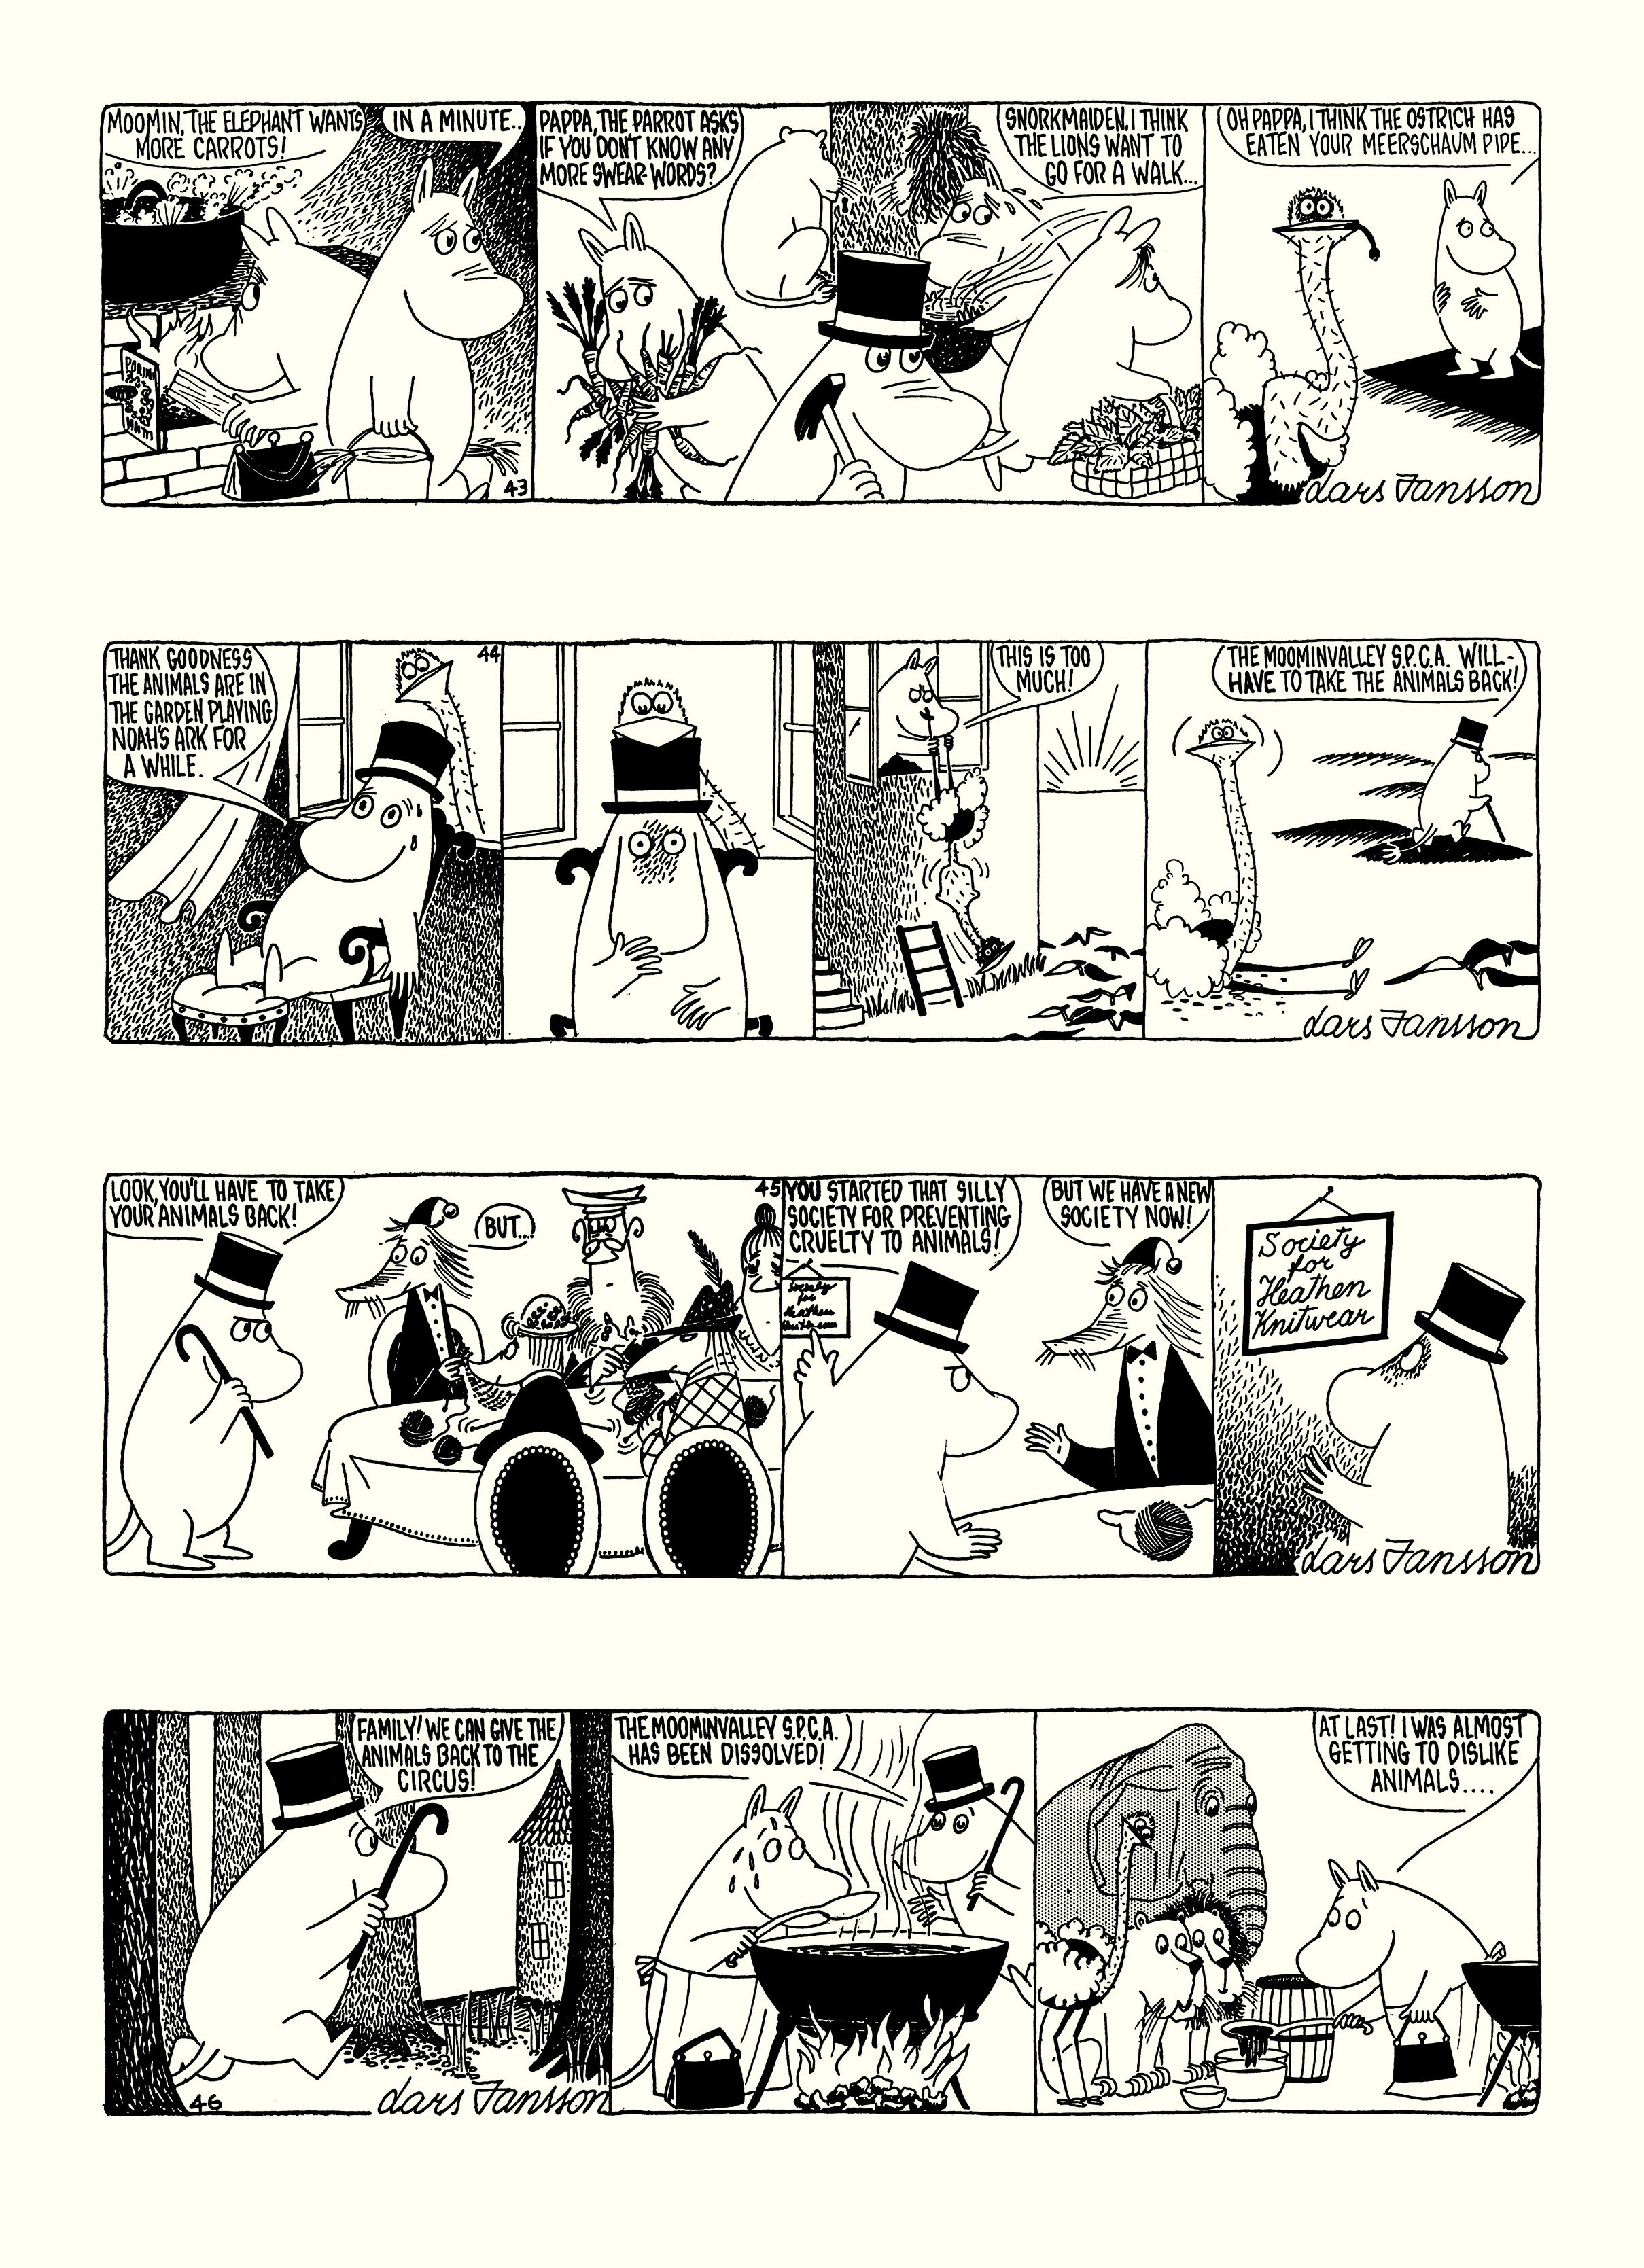 Read online Moomin: The Complete Lars Jansson Comic Strip comic -  Issue # TPB 6 - 79